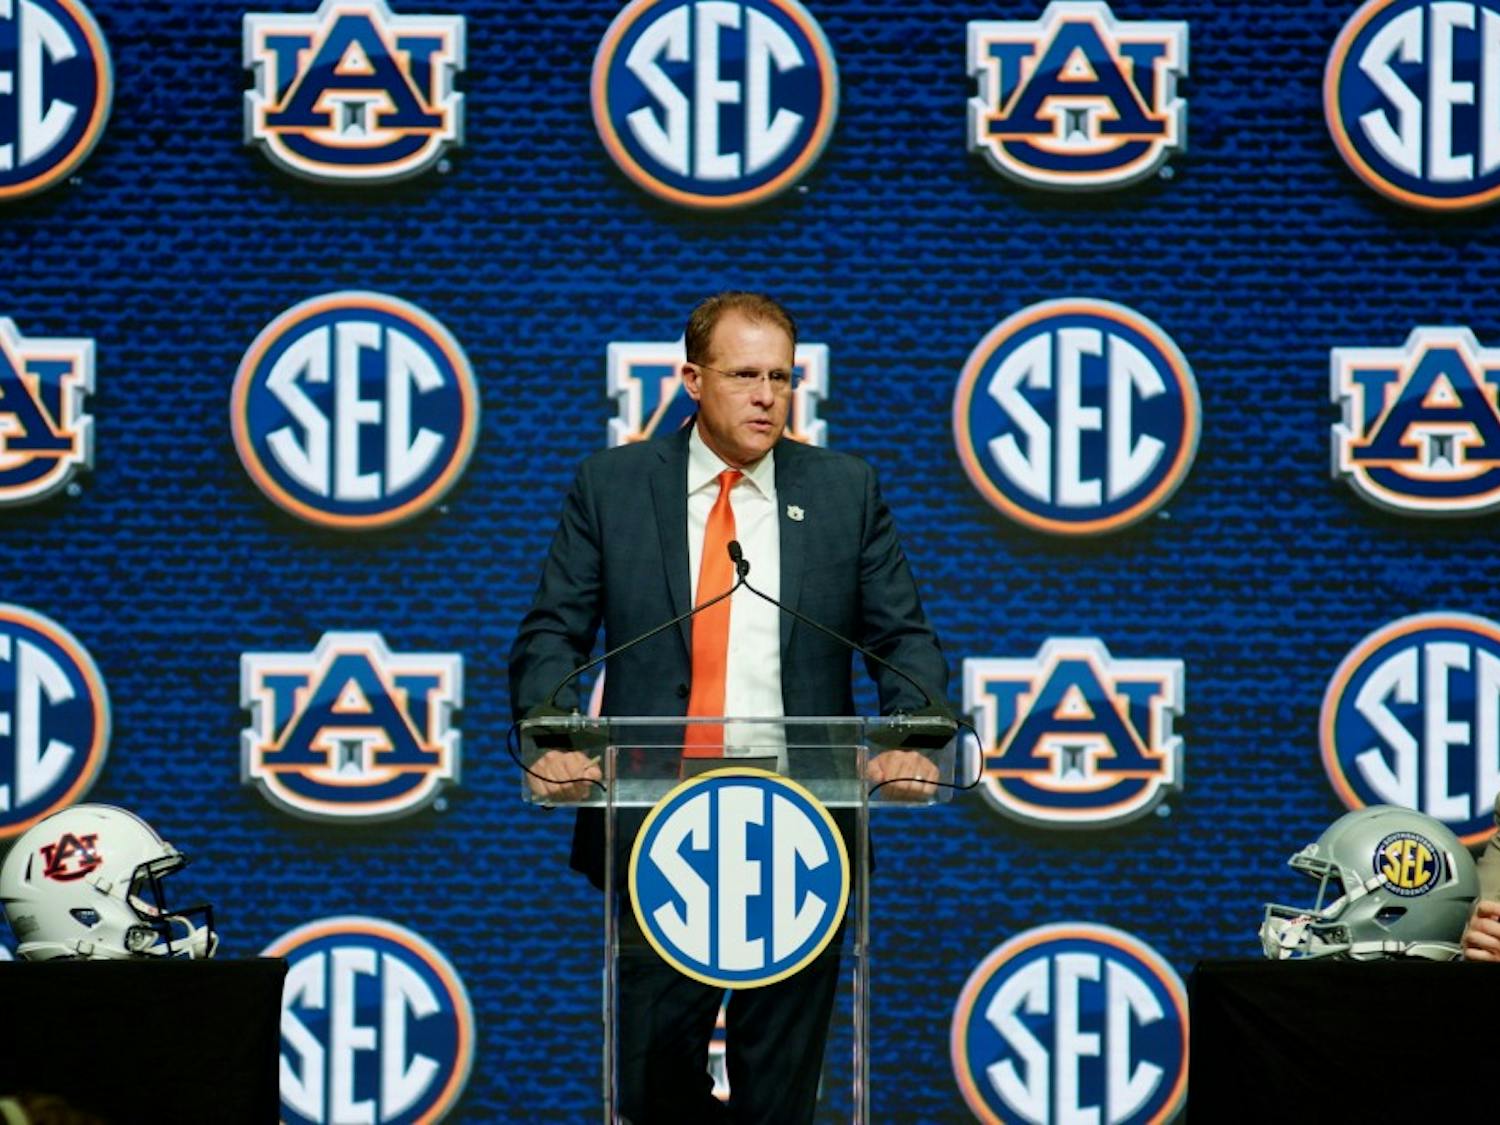 Guz Malzahn answers a question&nbsp;during an interview at SEC Media Days in the College Football Hall of Fame on Thursday, July 19, 2018 in Atlanta, Ga.